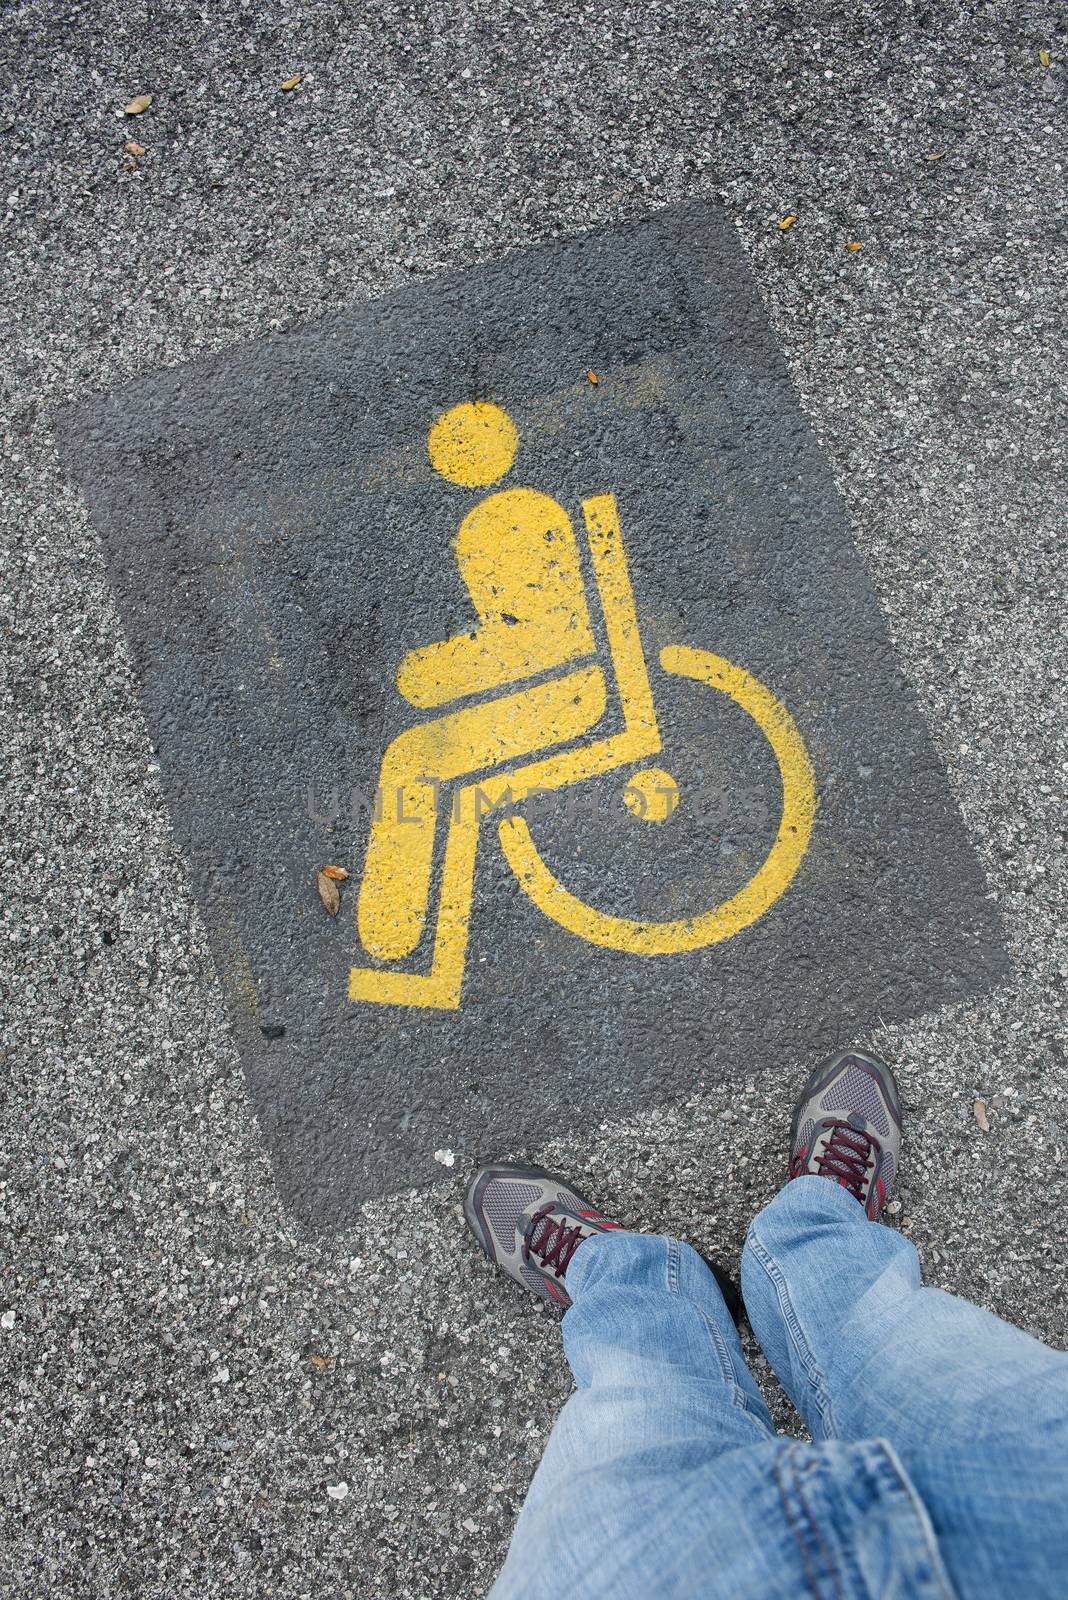 Parking for disables by sergiodv